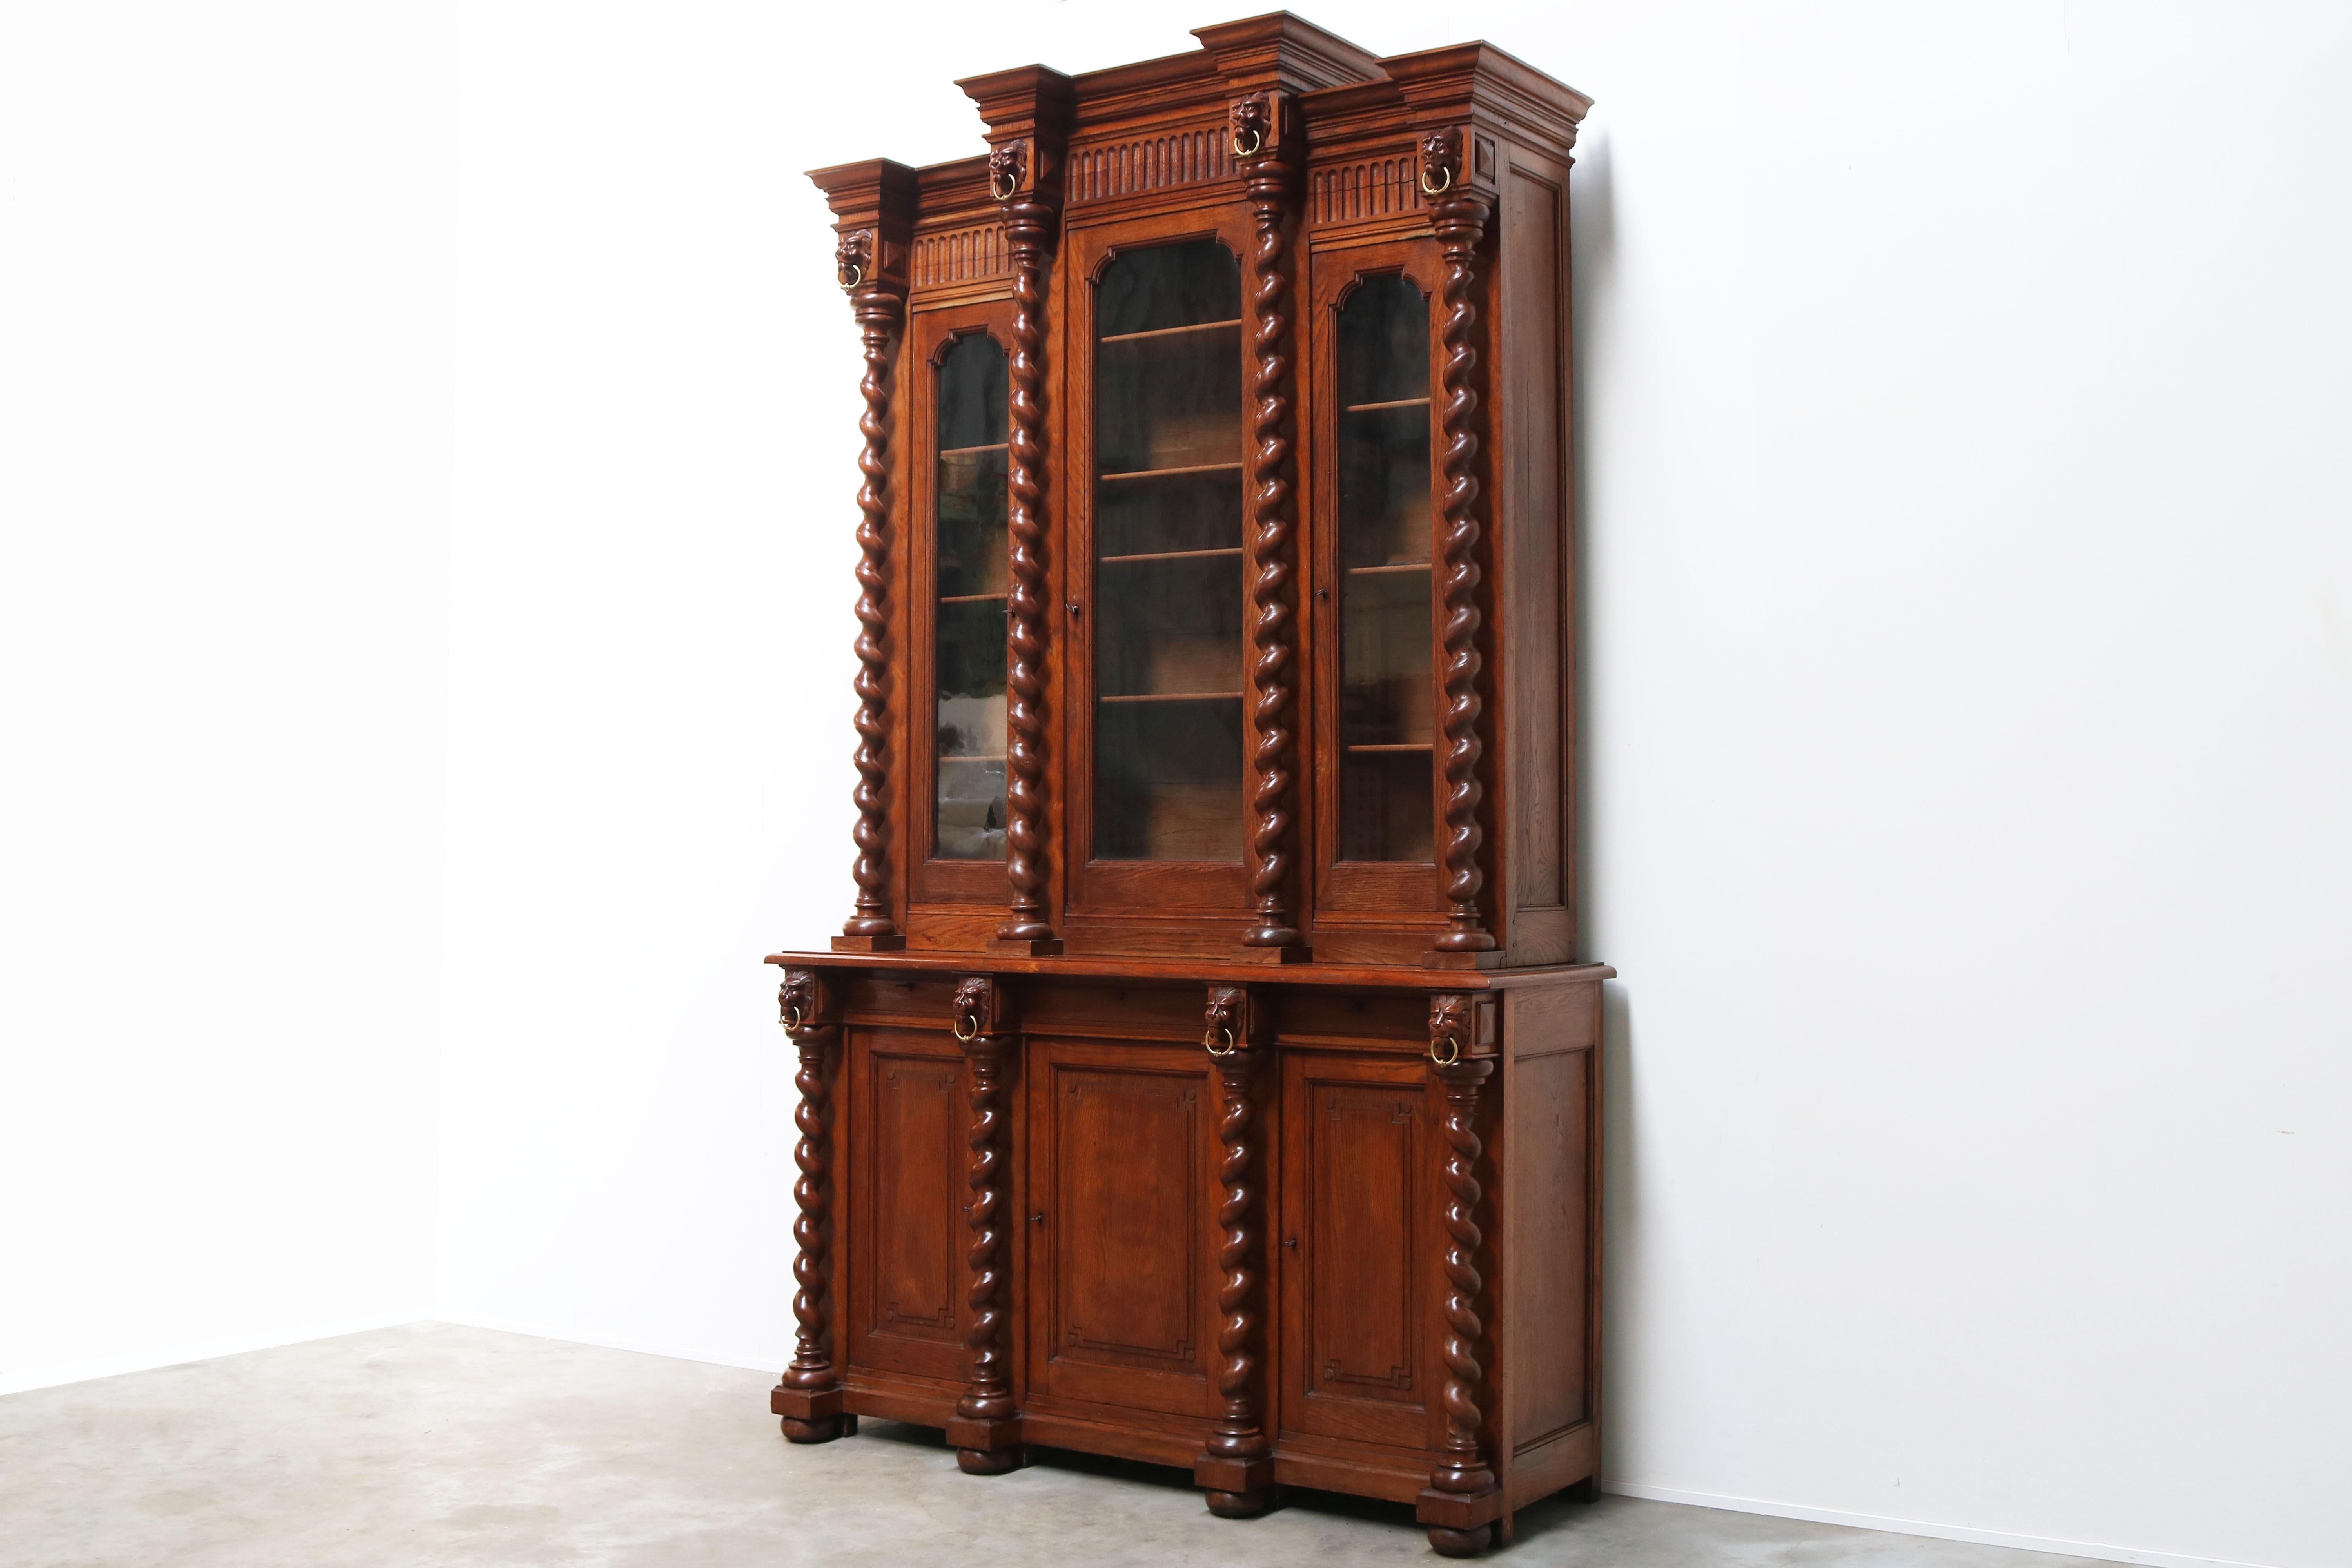 One of the most amazing pieces to ever leave our workshop! This French 19th century antique Renaissance Revival bookcase made out of solid European Oak.
We are proud to offer this piece. The bookcase has 8 amazing hand carved lion heads (around the